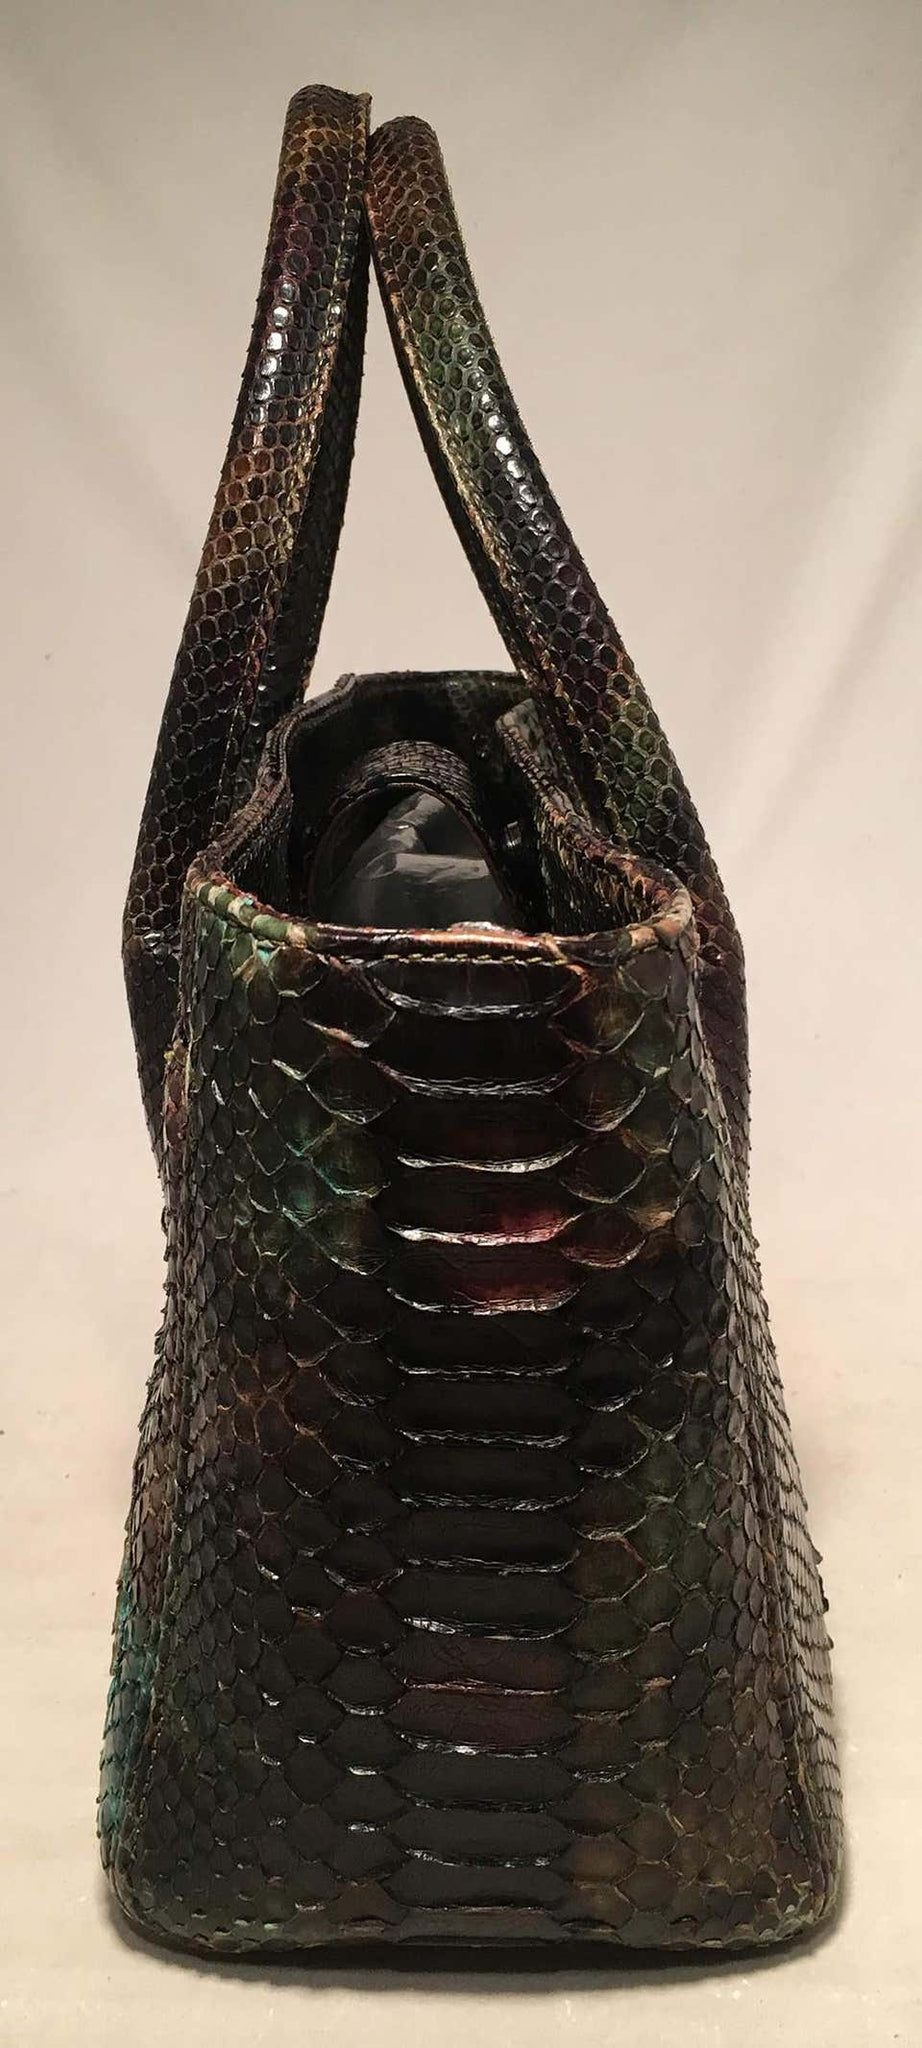 Chanel Green and Brown Multicolor Python Snakeskin Cerf Tote Handbag –  Dignity Jewels Inc.